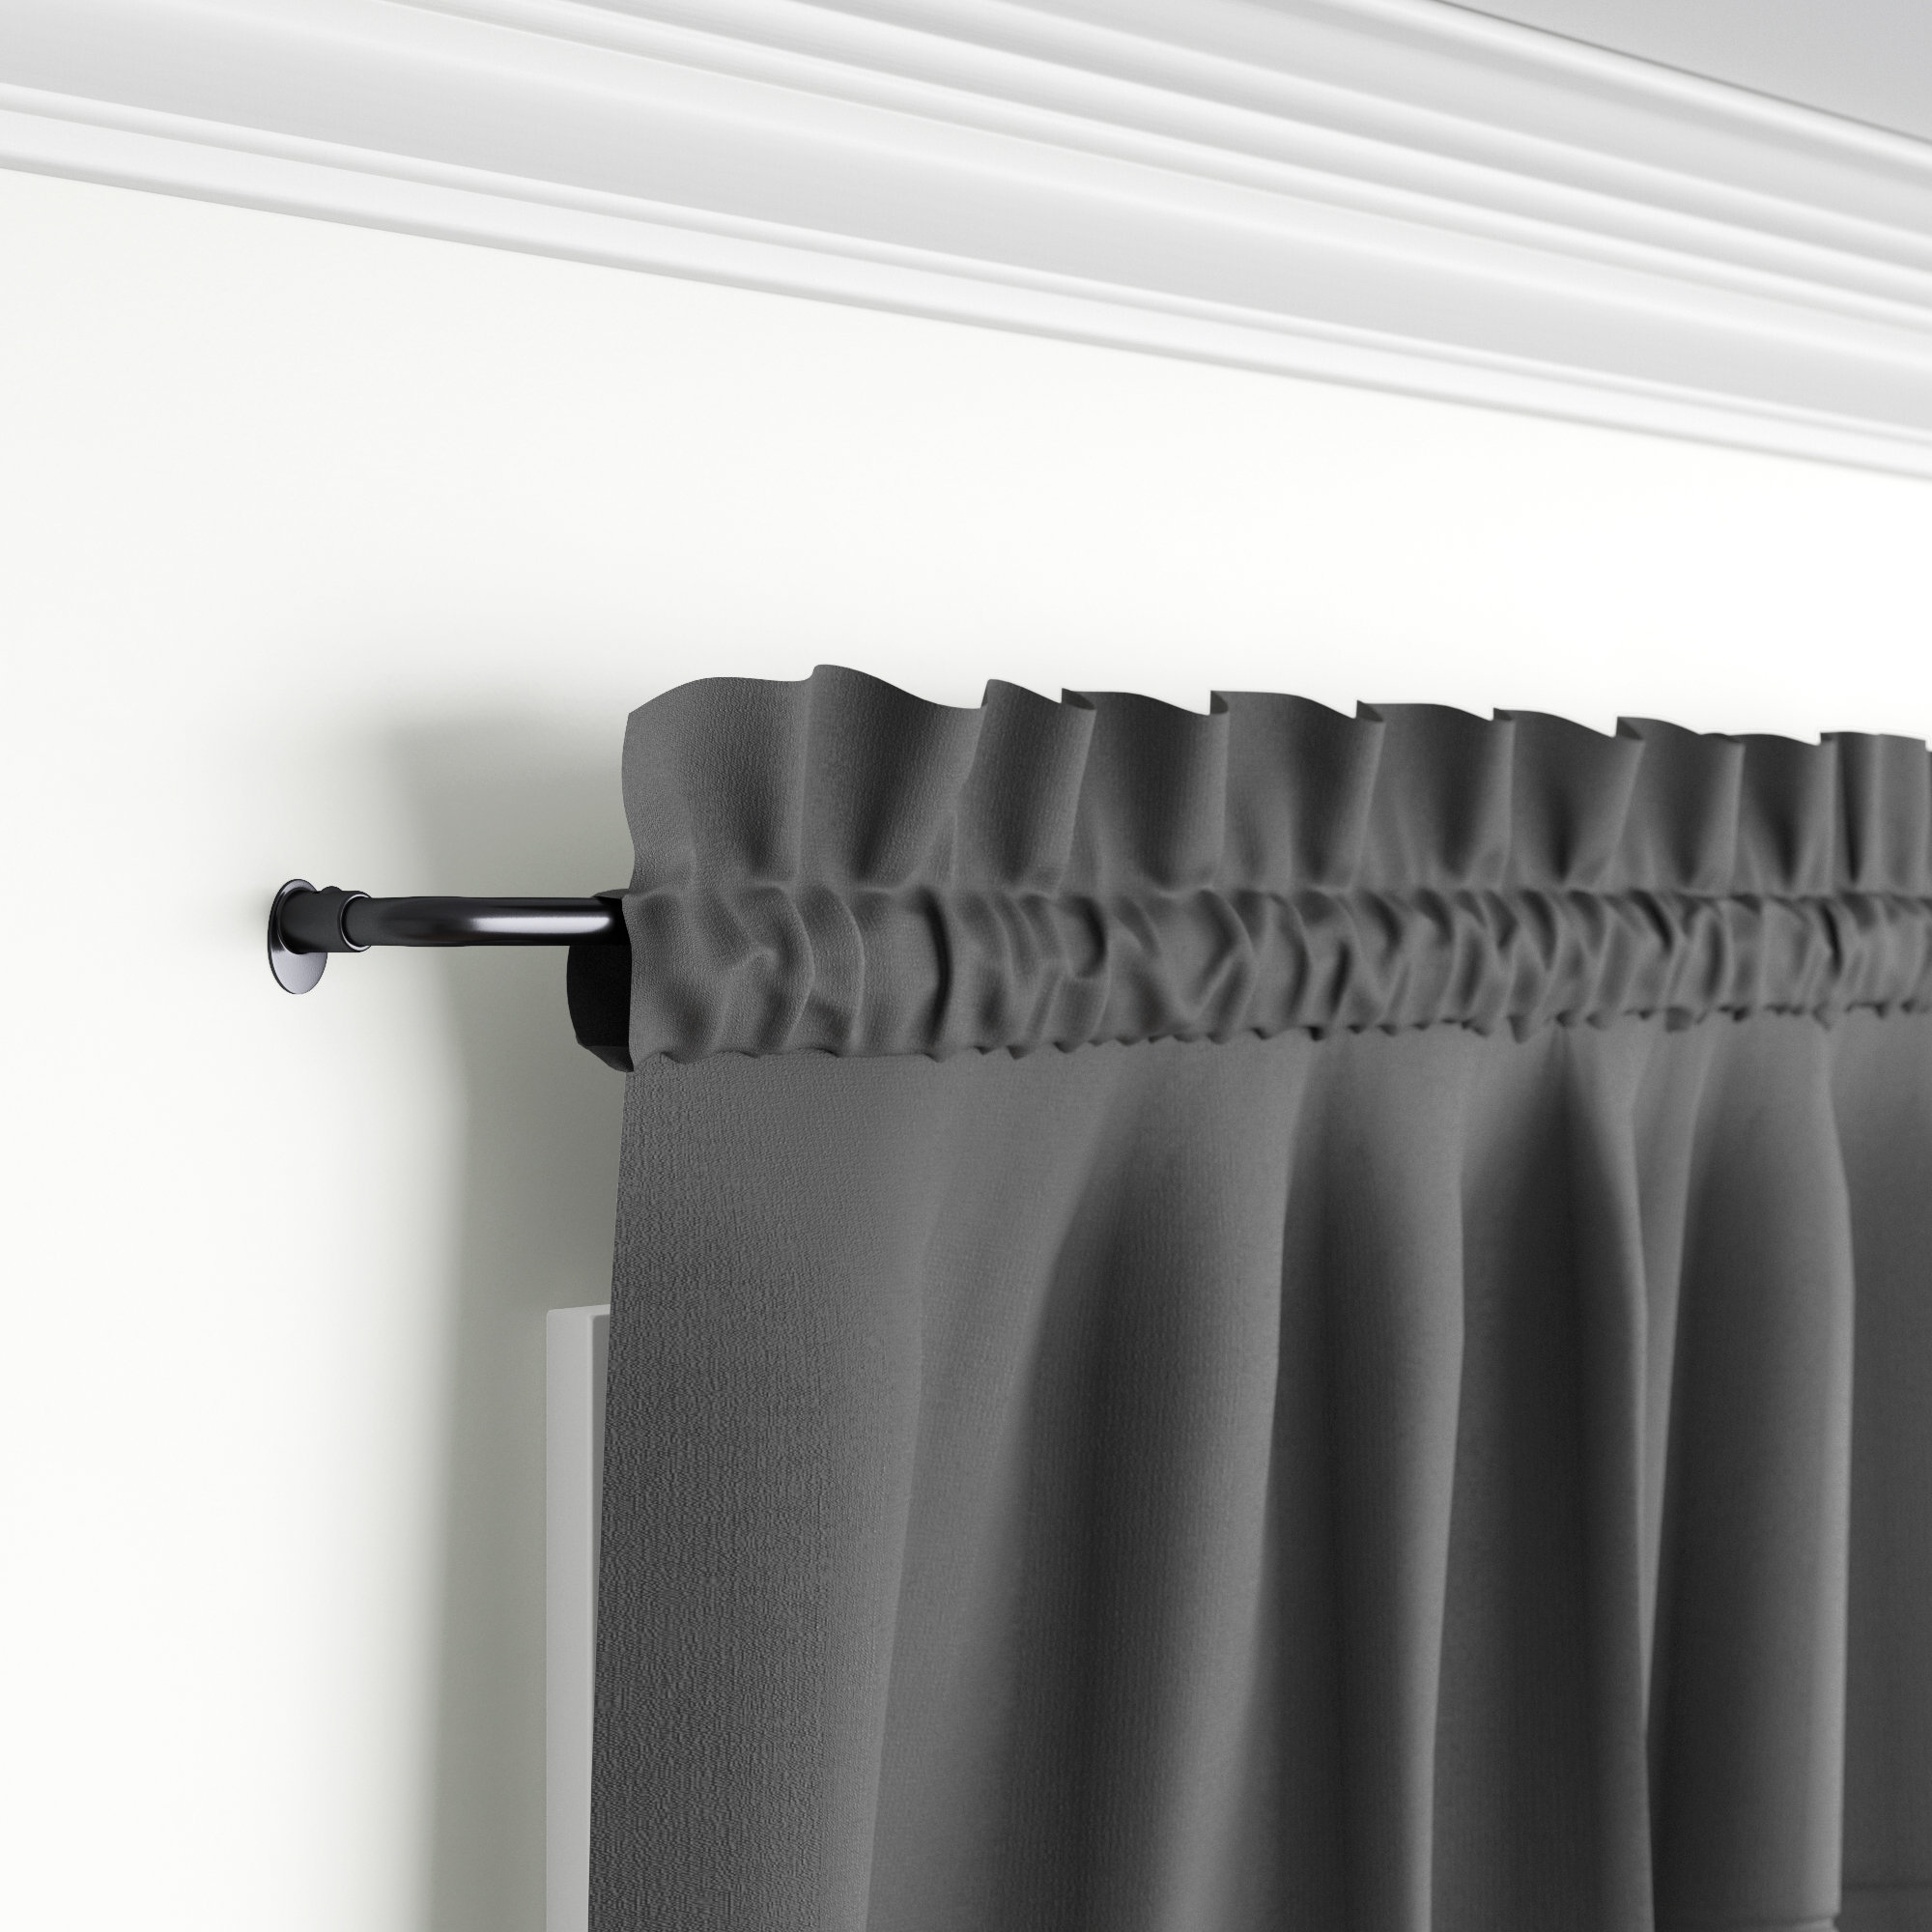 N\C Blackout Curved Curtain Rod Wrap Around Curtain Rods Size: 86-120 Inch Room Darkening Curtain Rods for Windows 66 to 120 Inch Outdoor and Indoor Black